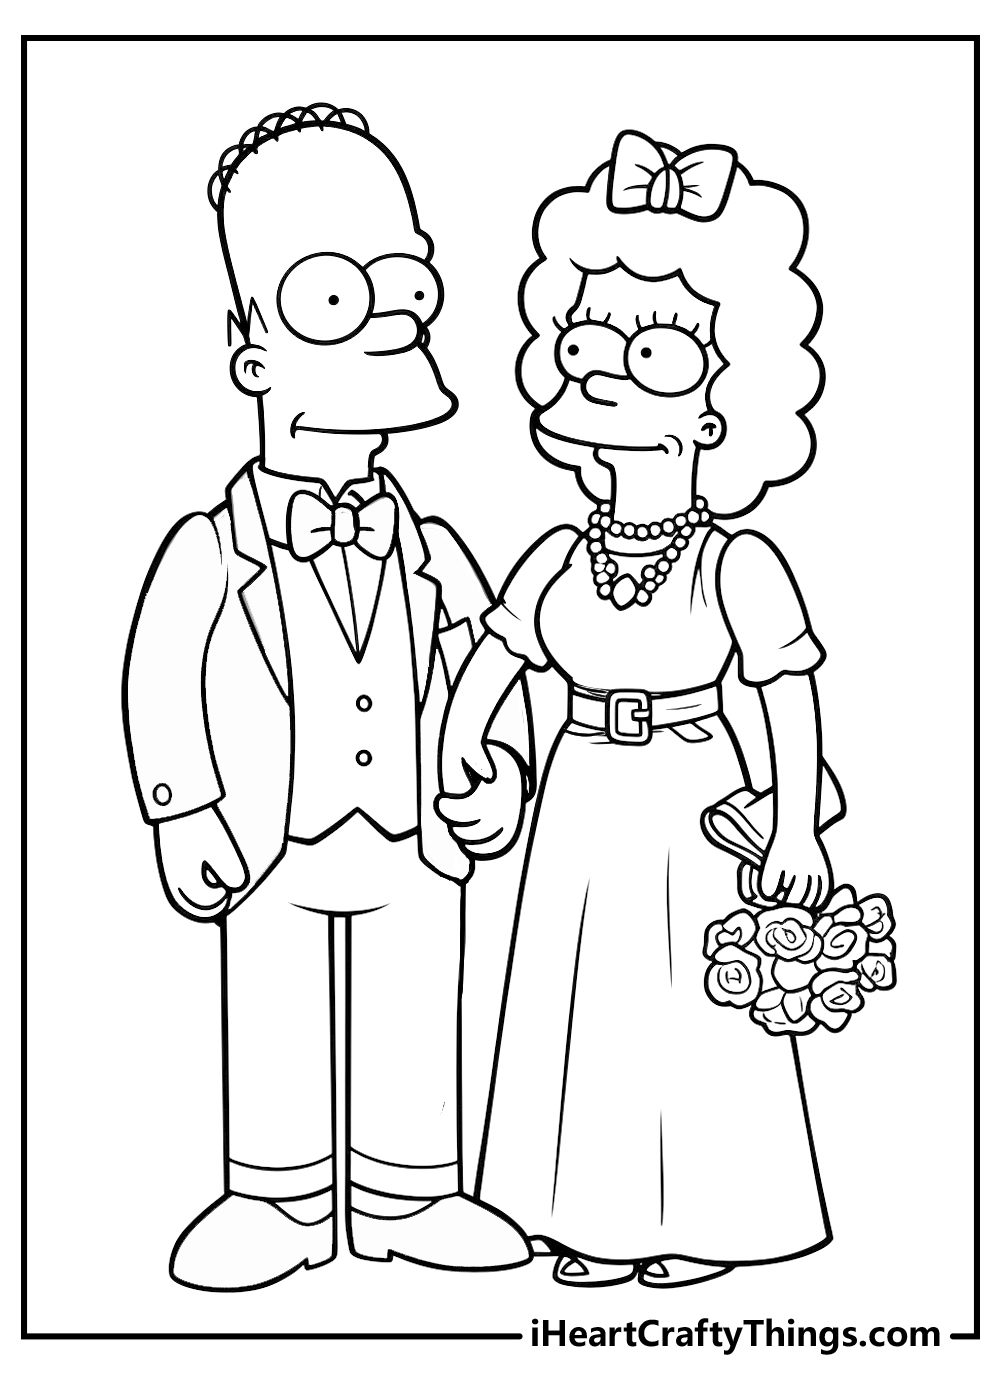 simpsons coloring sheet free download